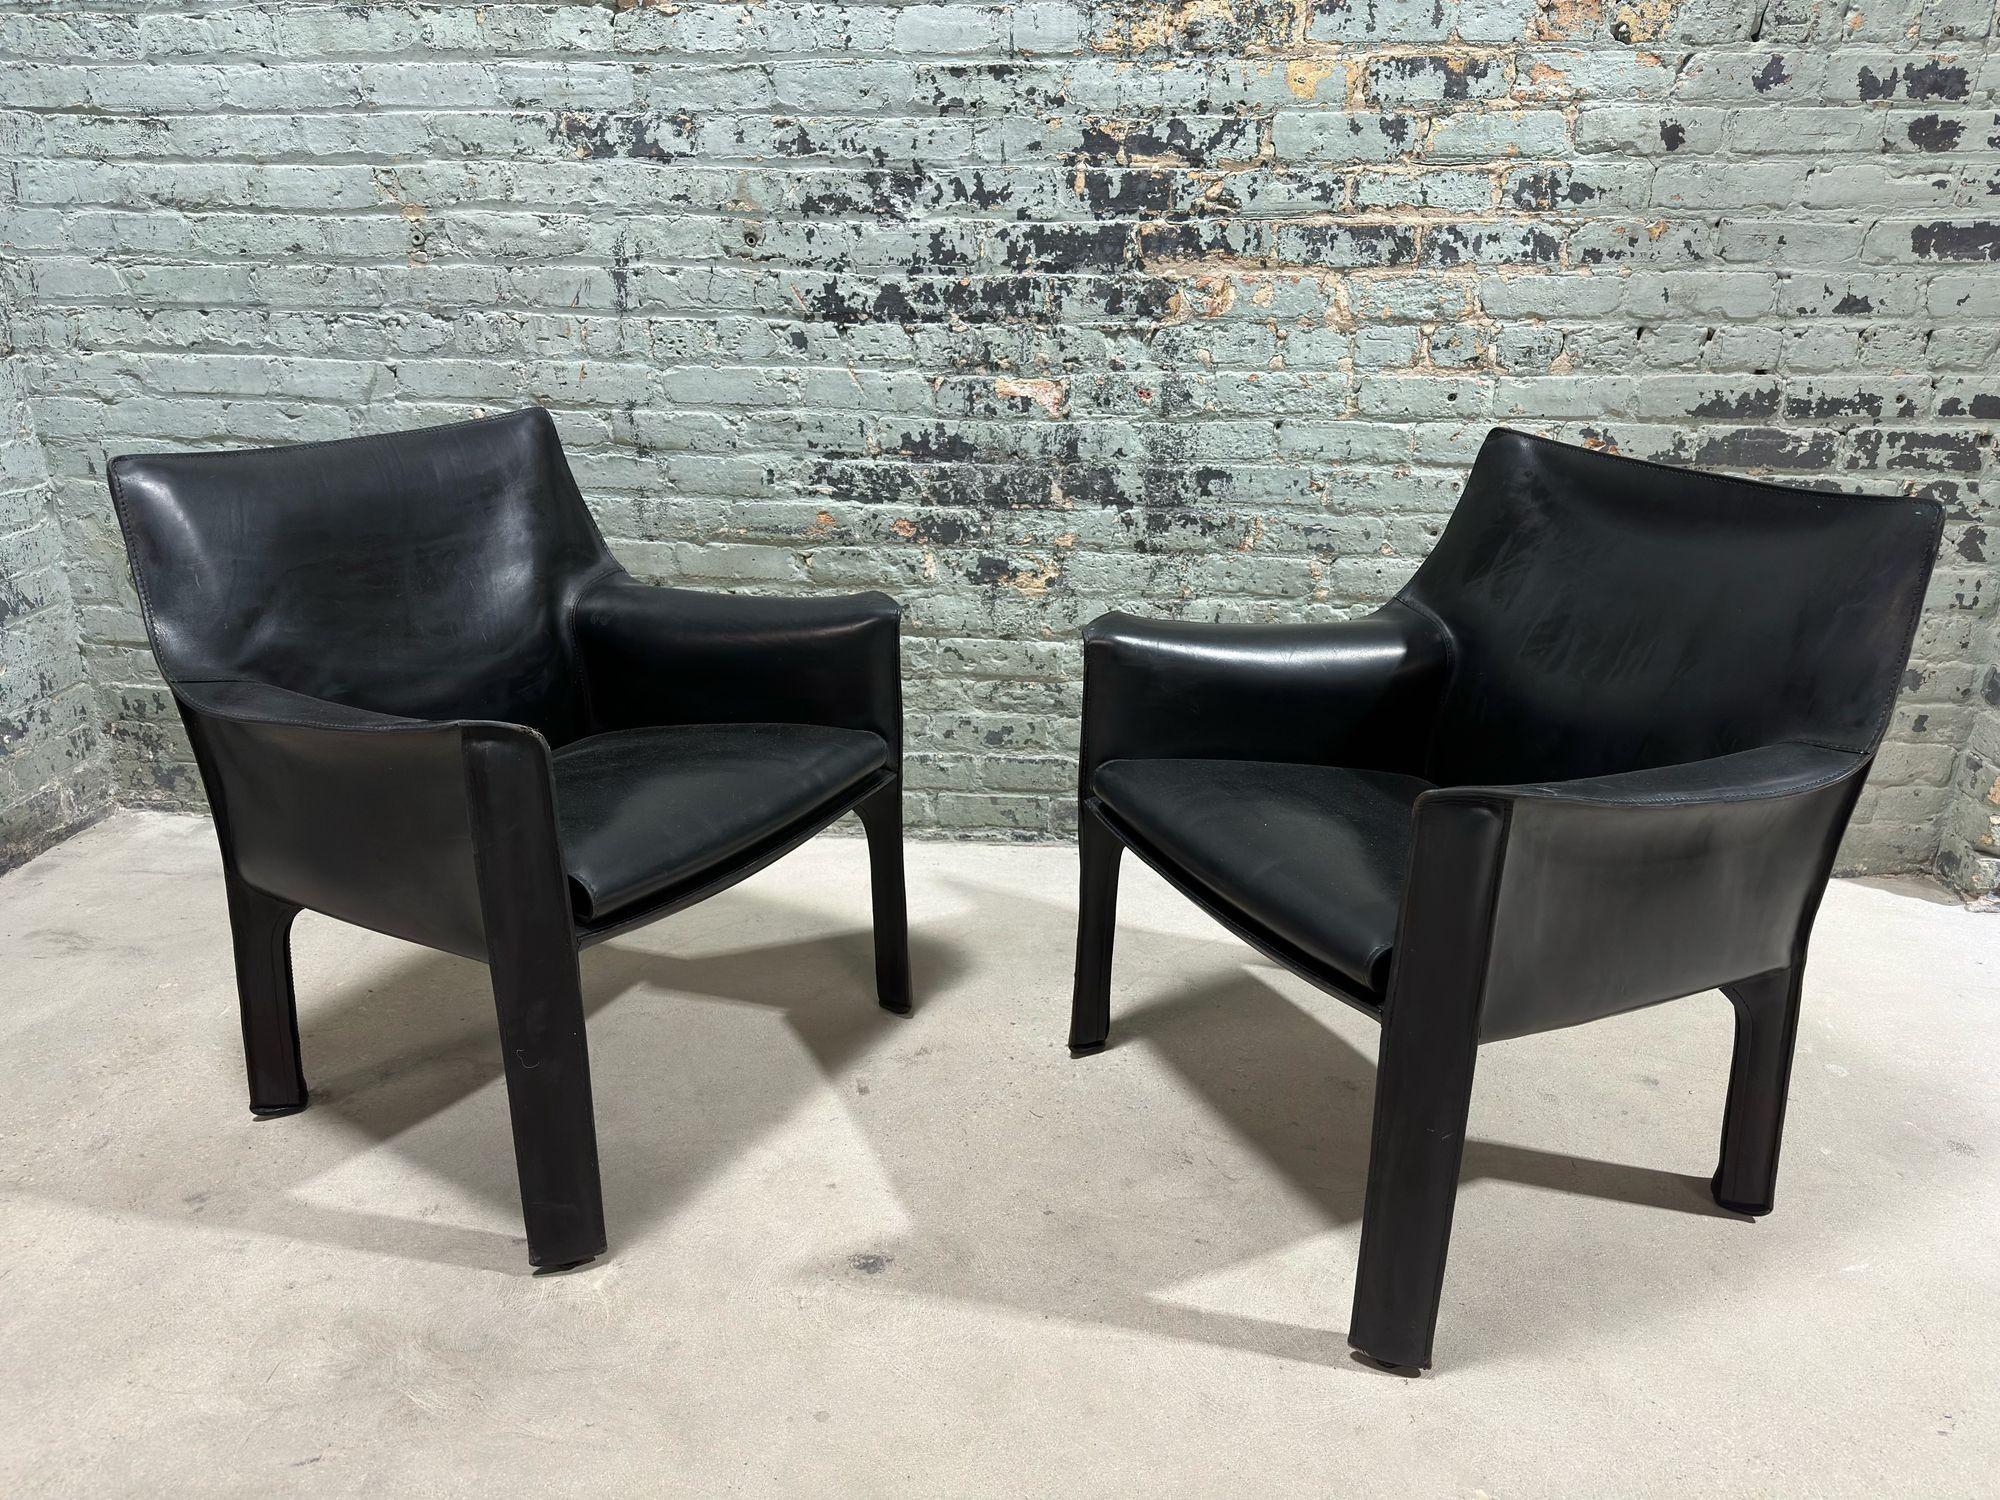 Post-Modern Pair Mario Bellini Black Leather Cab Chairs, Model 414 for Cassina Italy, 1980 For Sale